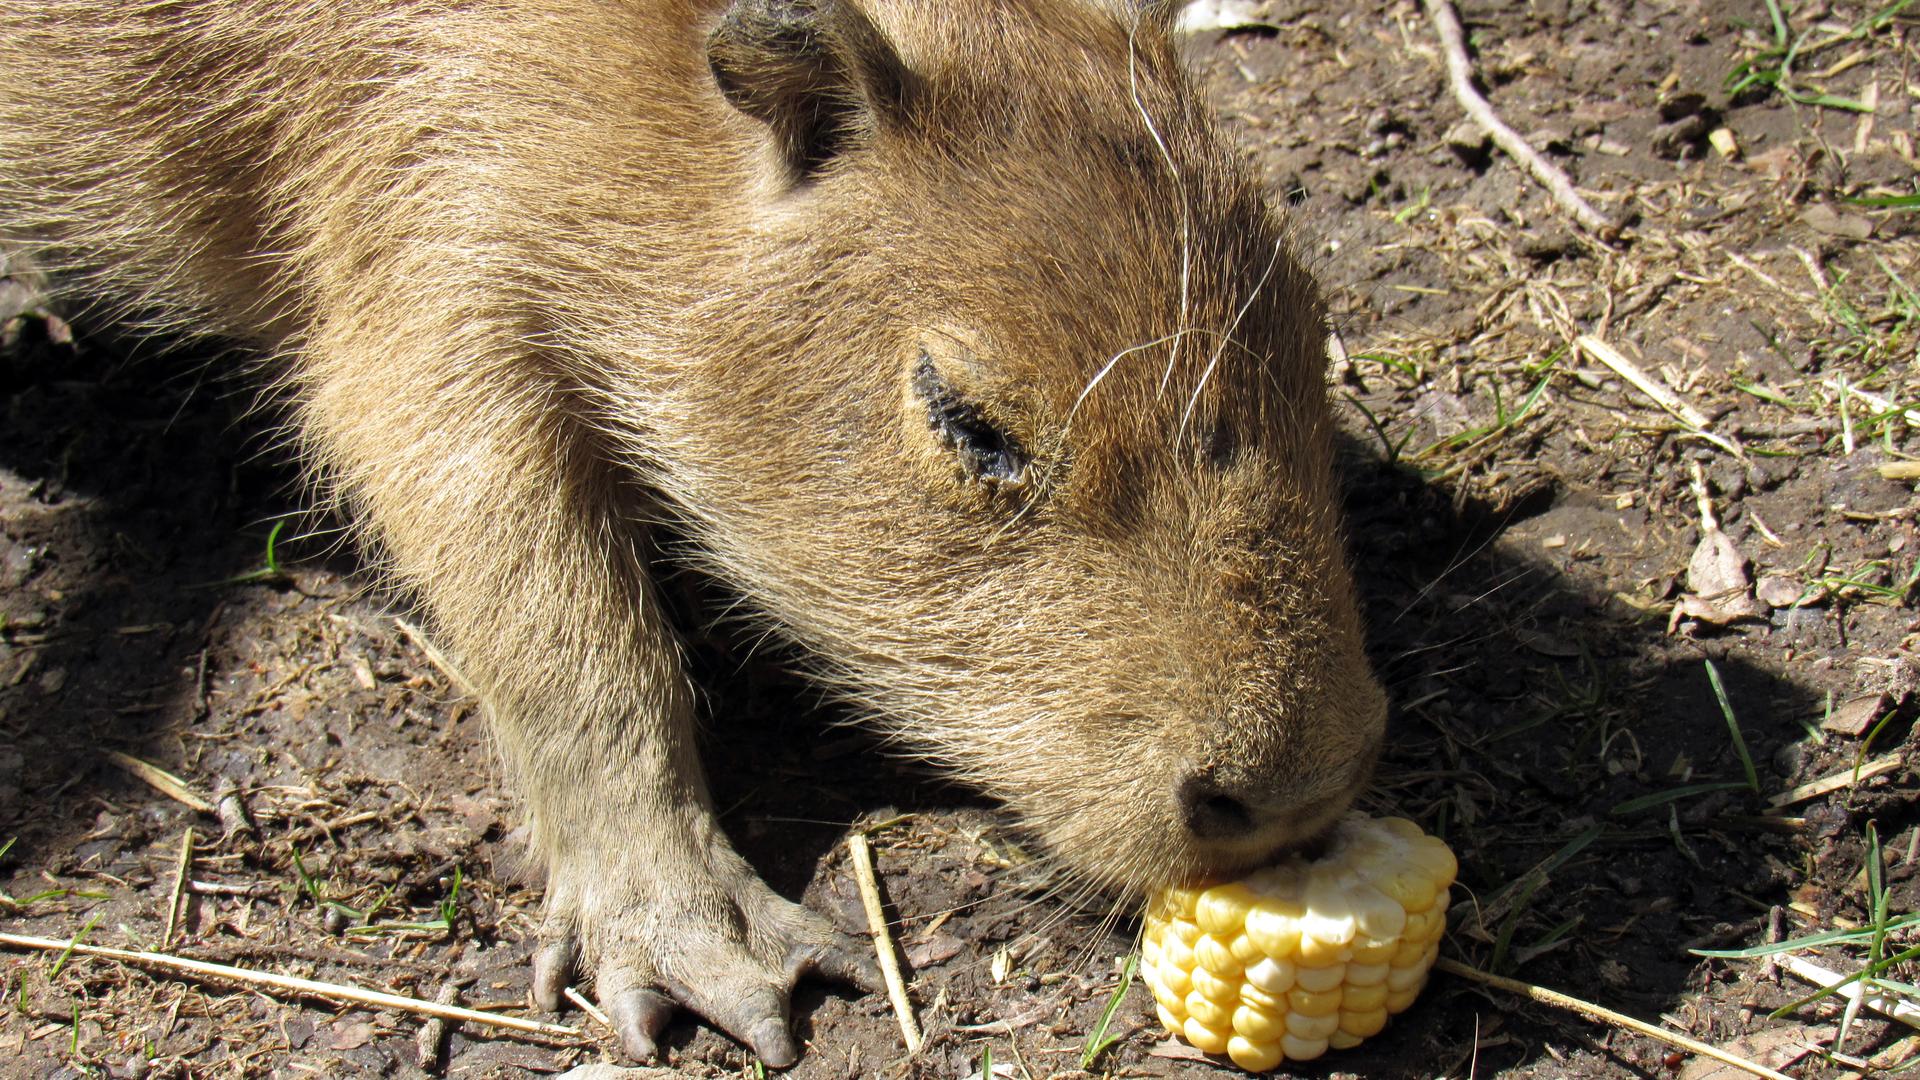 Toronto's High Park Zoo has some new residents. The zoo's pair of capybaras had babies. Here's one of the new family members.